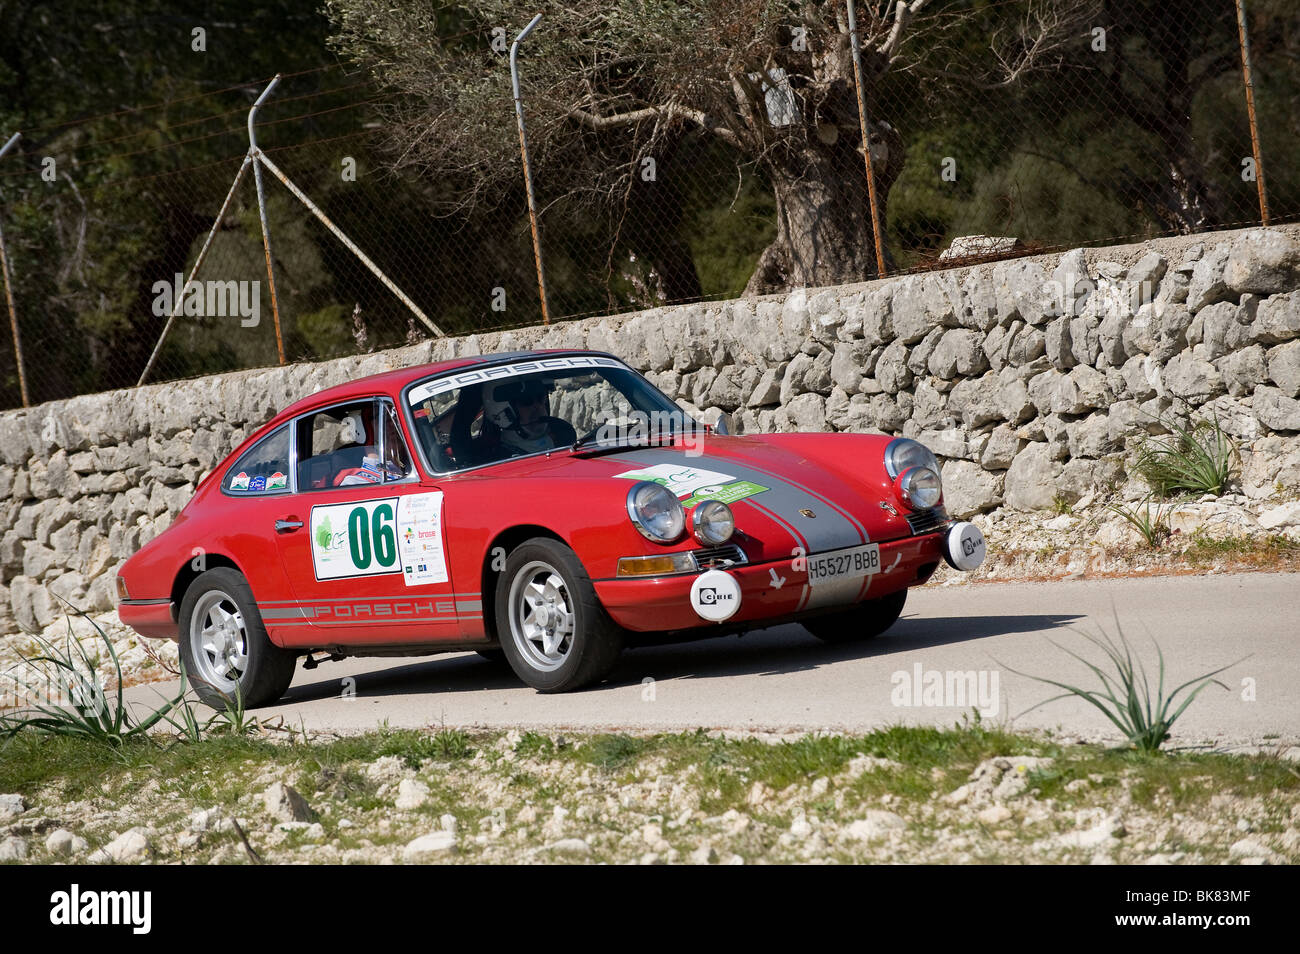 1968 Porsche 911s classic sports car taking part in a rally in Spain. Stock Photo